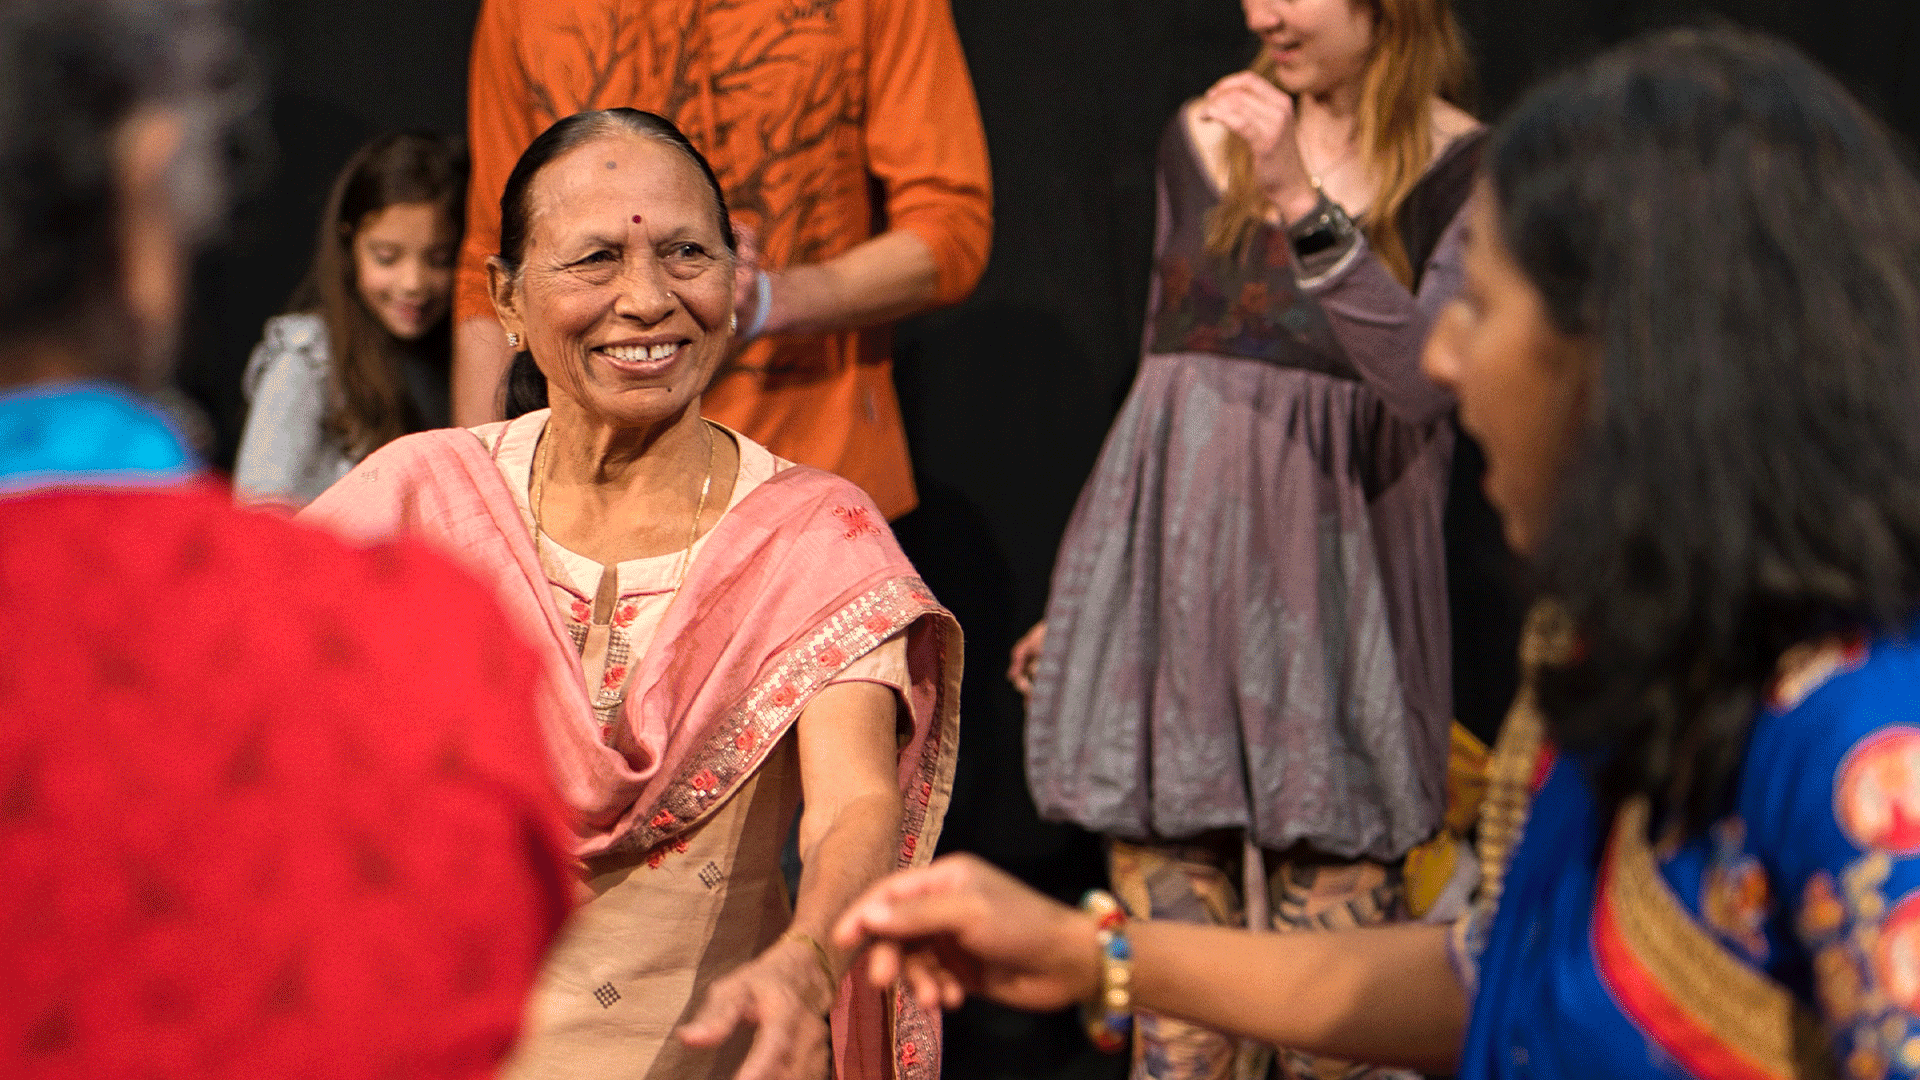 A smiling woman wearing traditional Garba dance dress reaches out to another women mid-dance